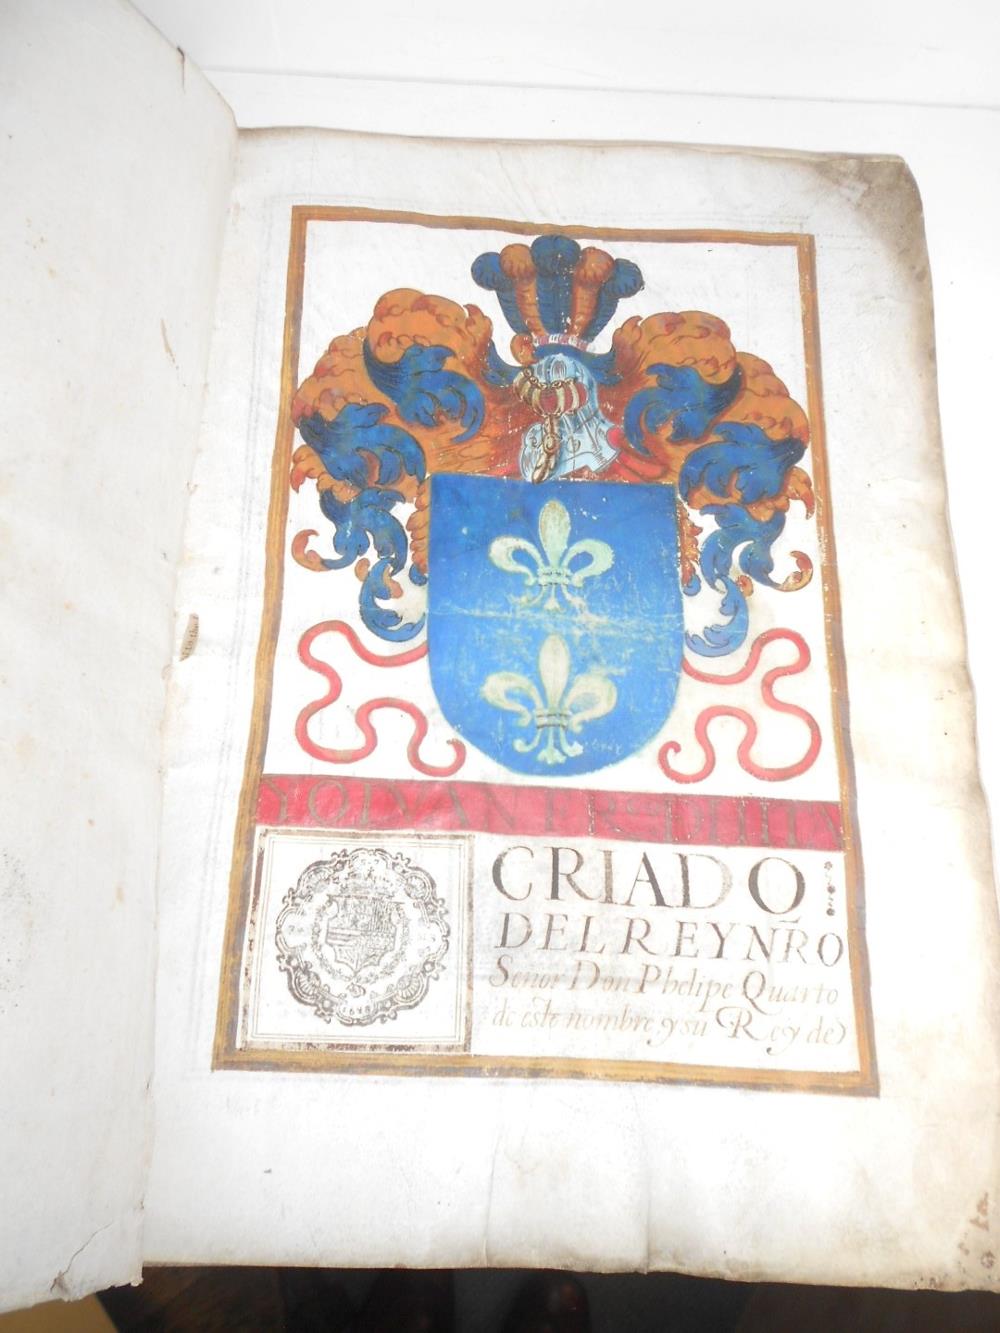 A manuscript Spanish armorial citation or document dated 1648, referring to the Celaya family, on